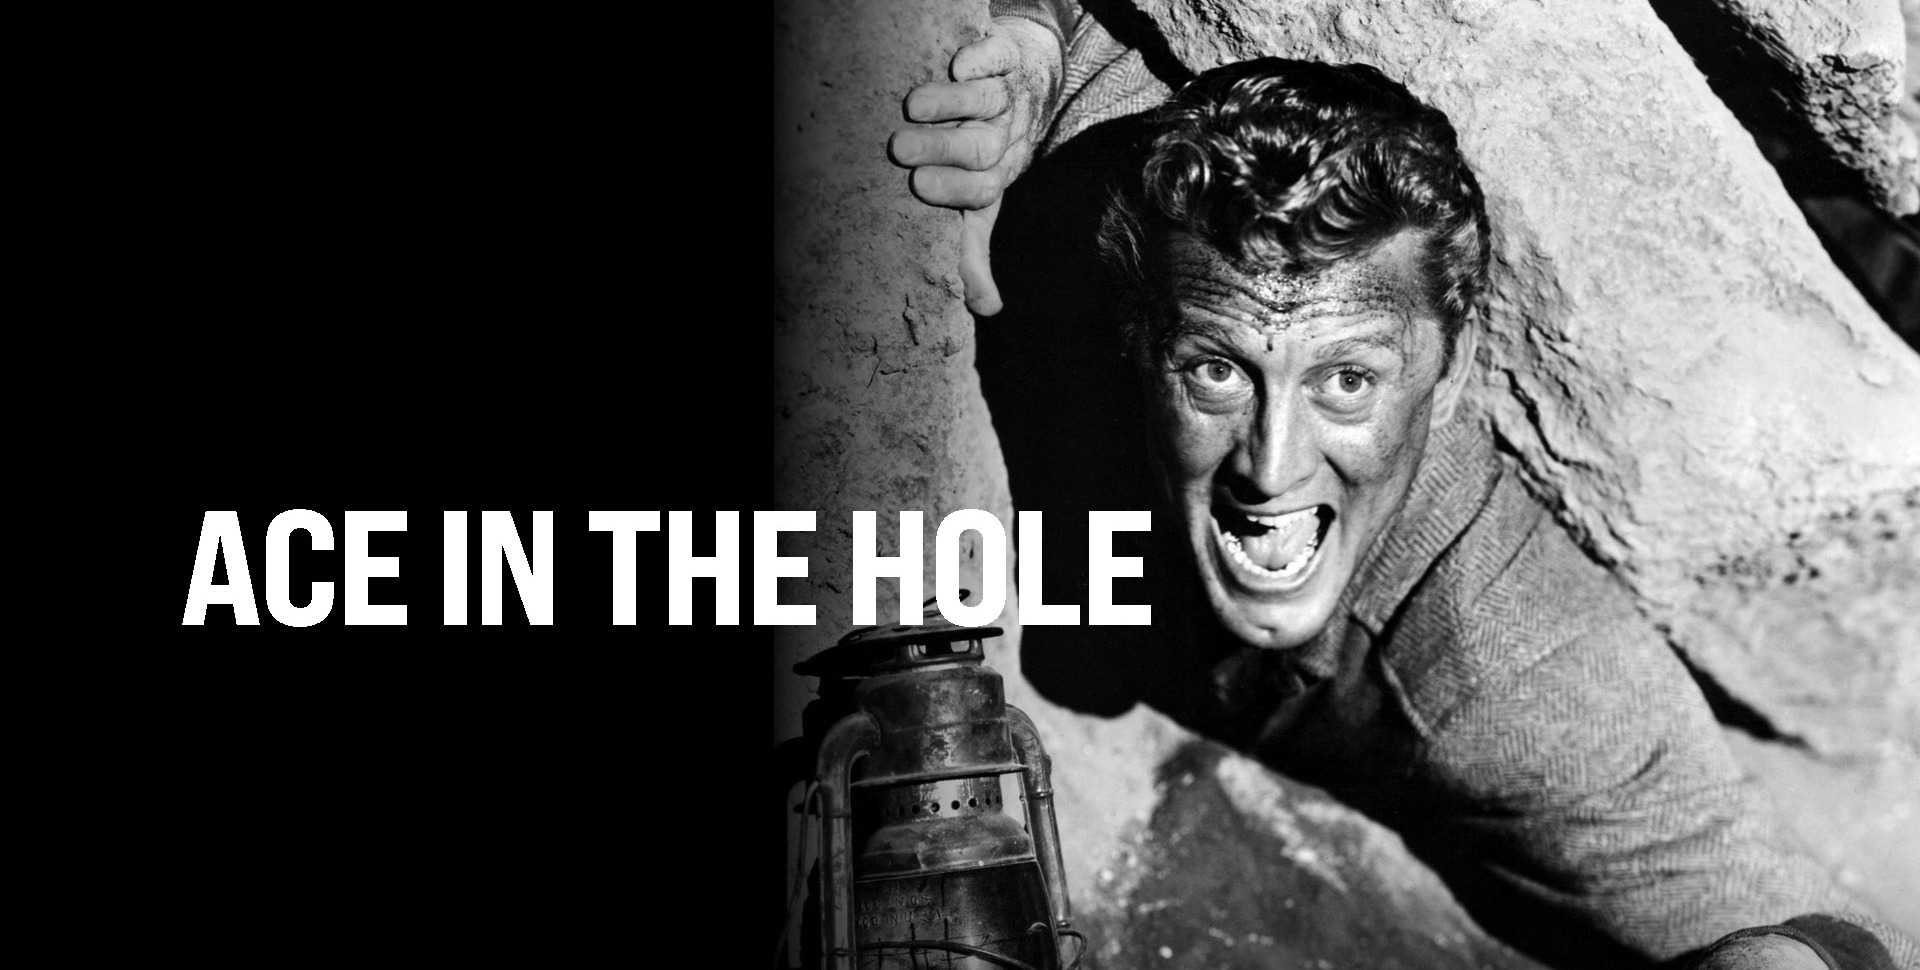 34-facts-about-the-movie-ace-in-the-hole